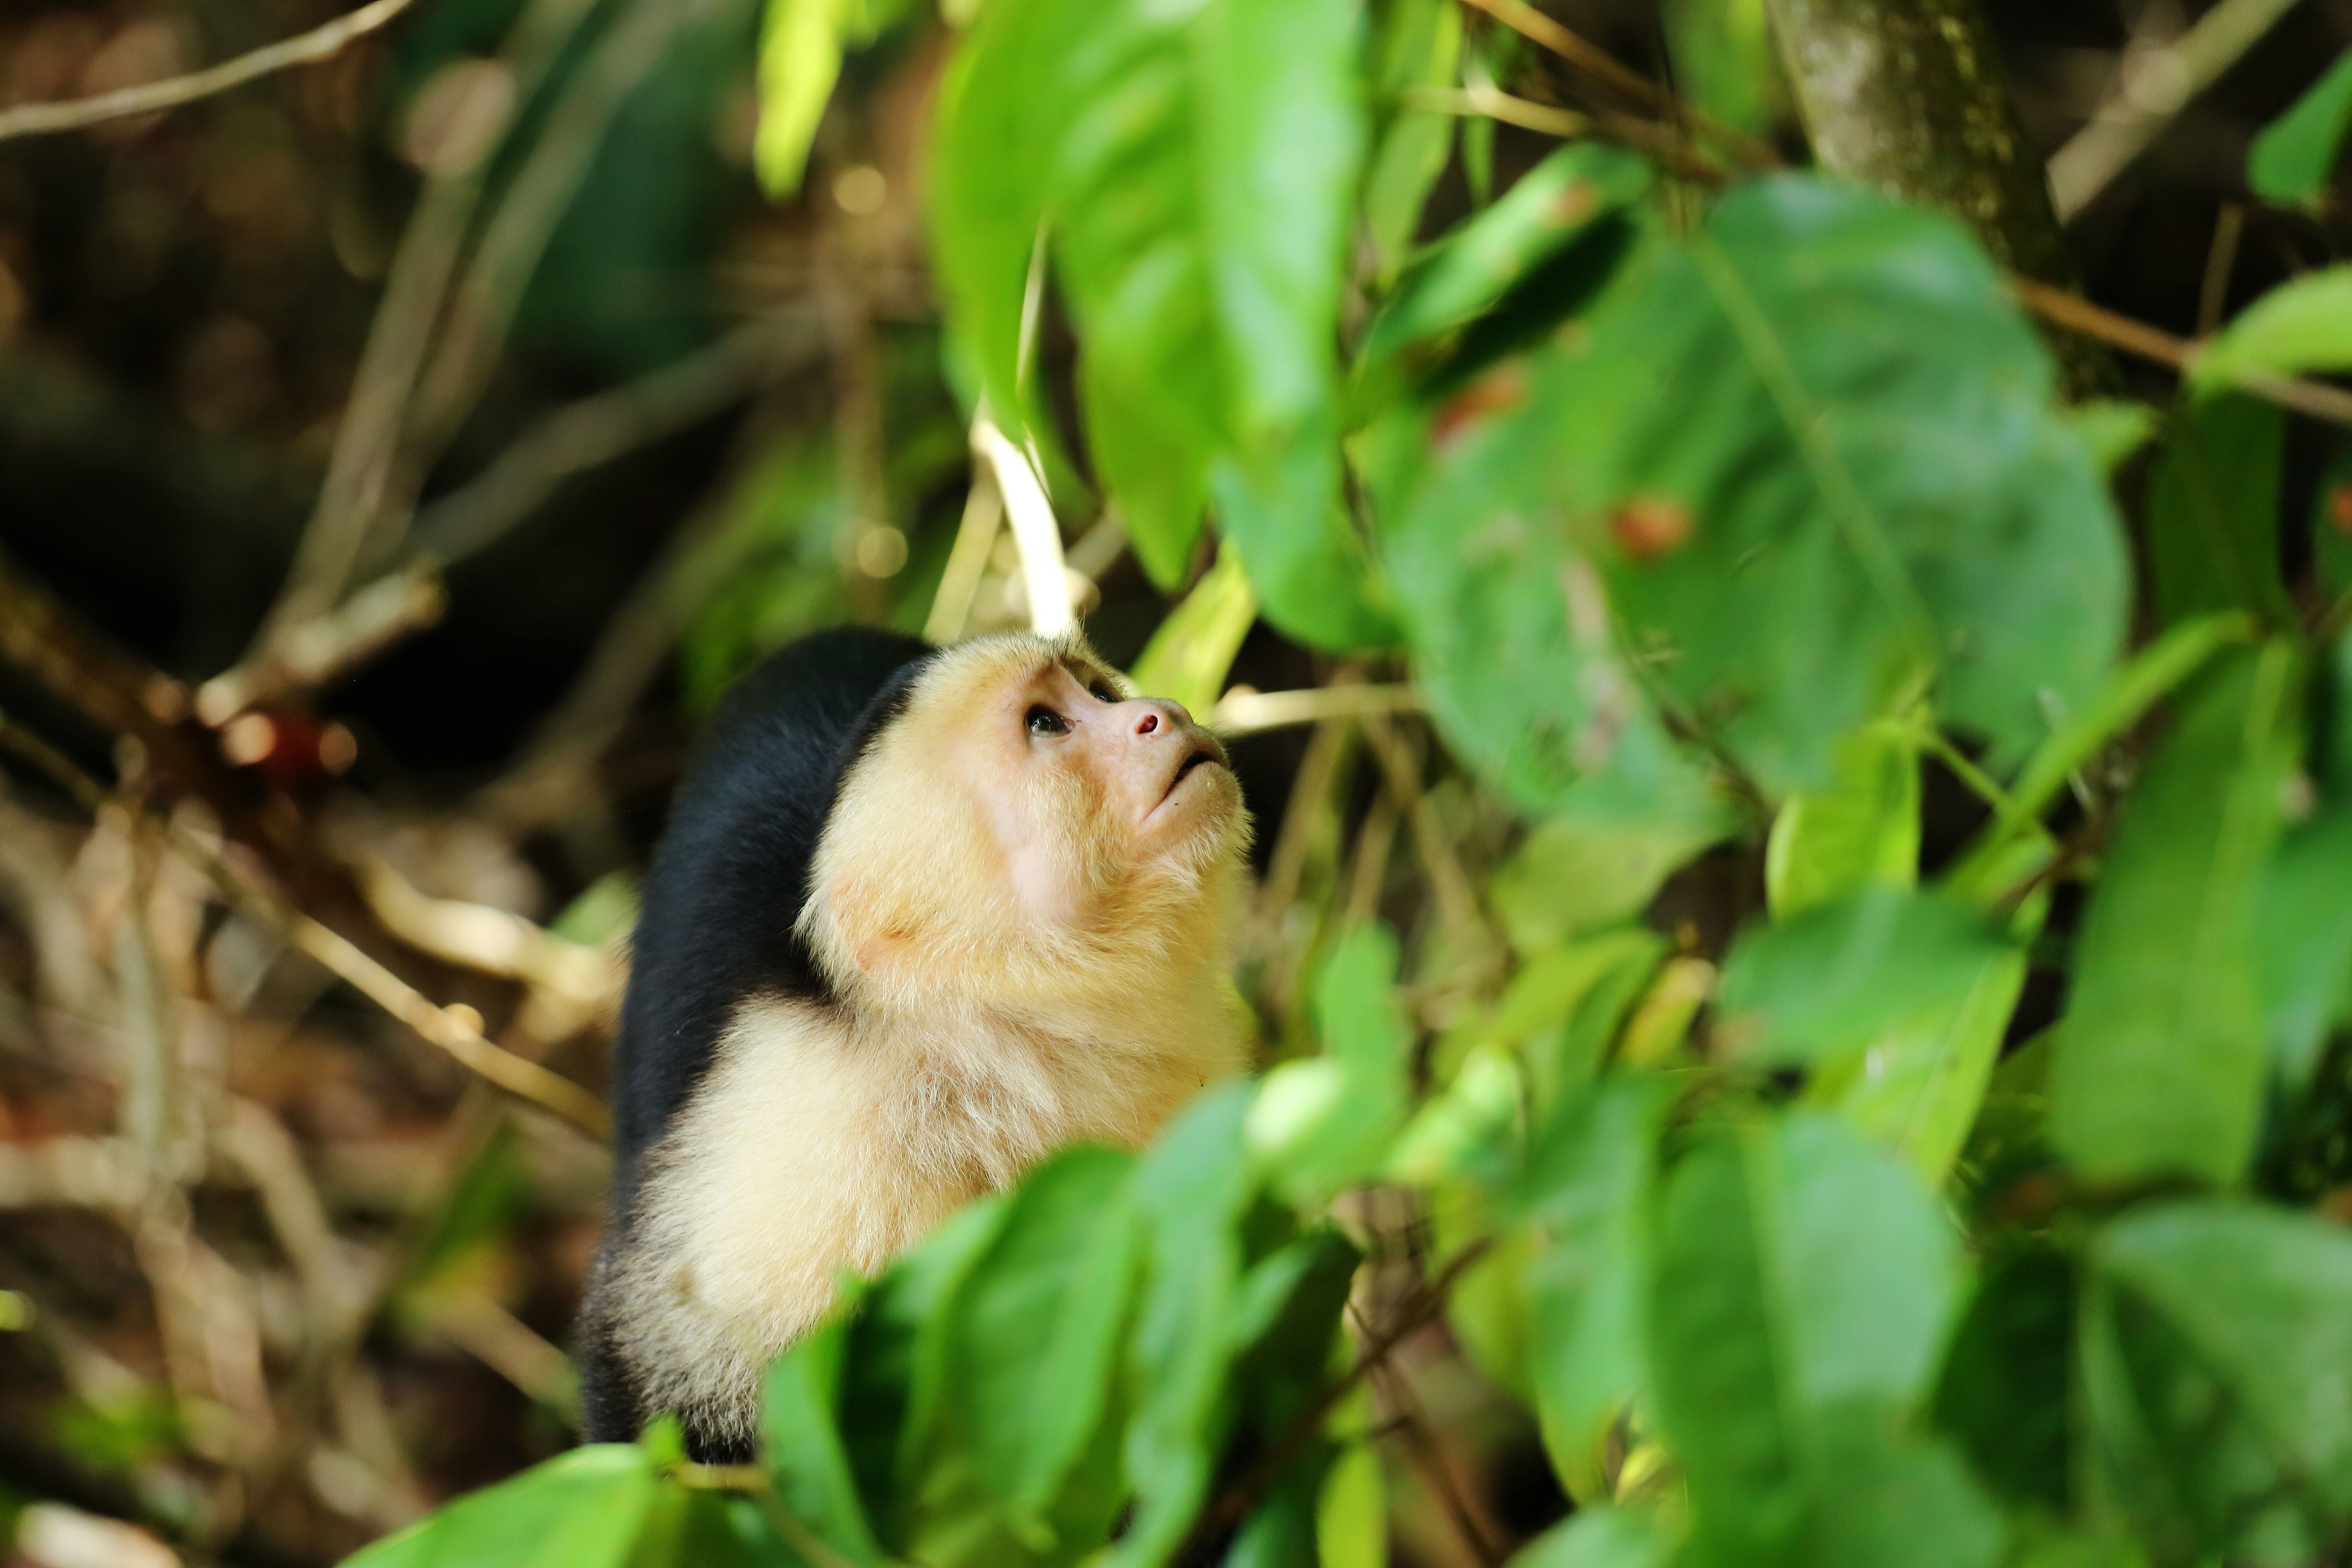 Panamanian white faced monkey looking up